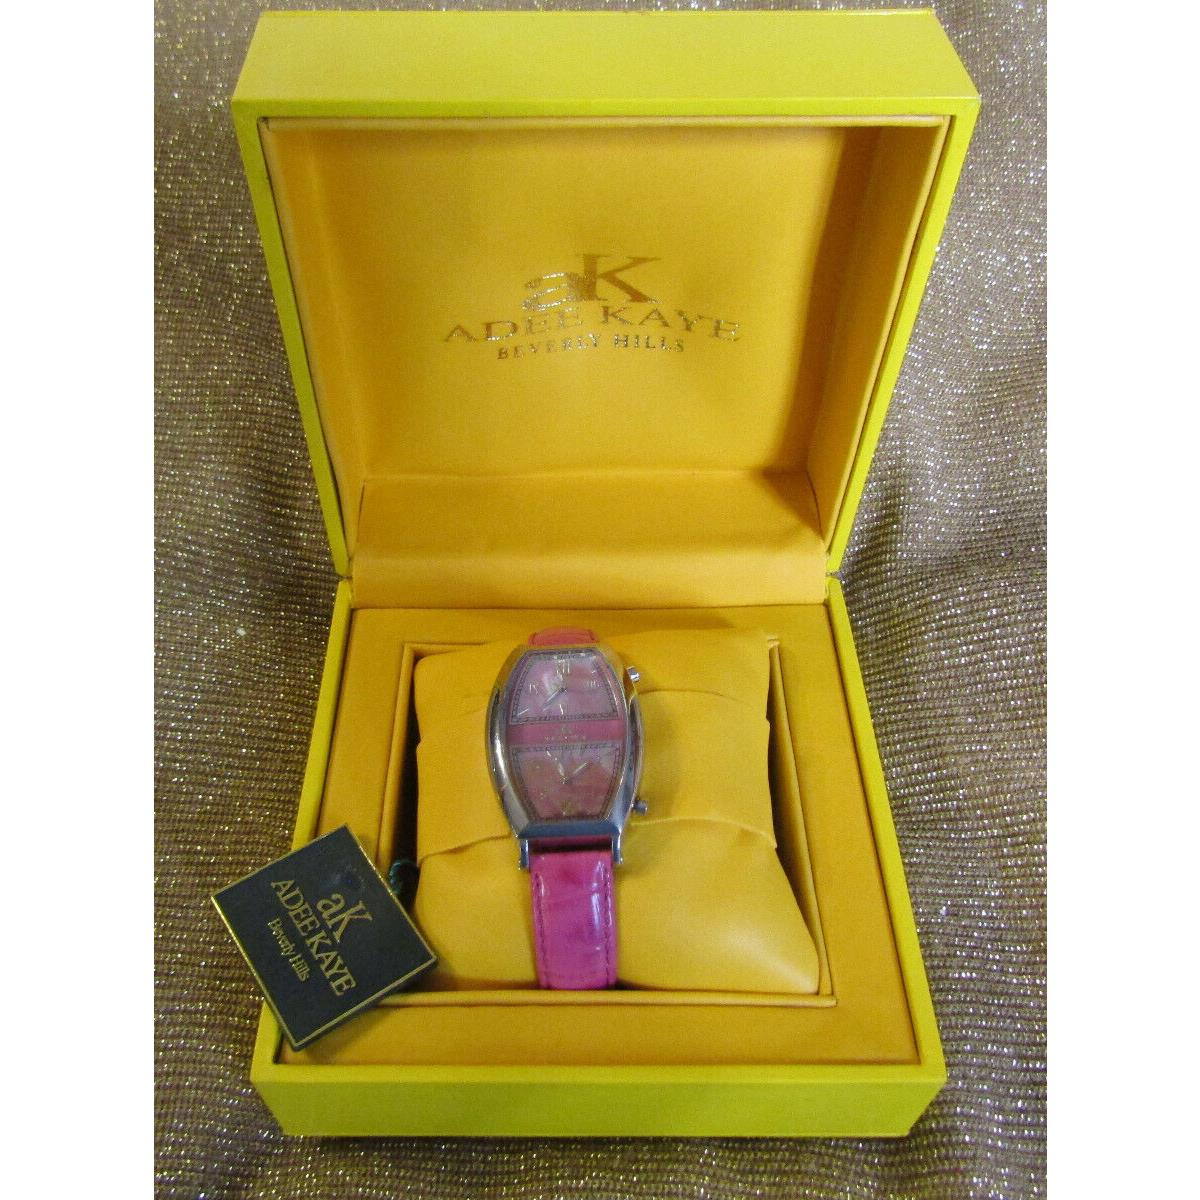 Adee Kaye Beverly Hills Nos Double Face Watch Pink Mother of Pearl AK148-1L